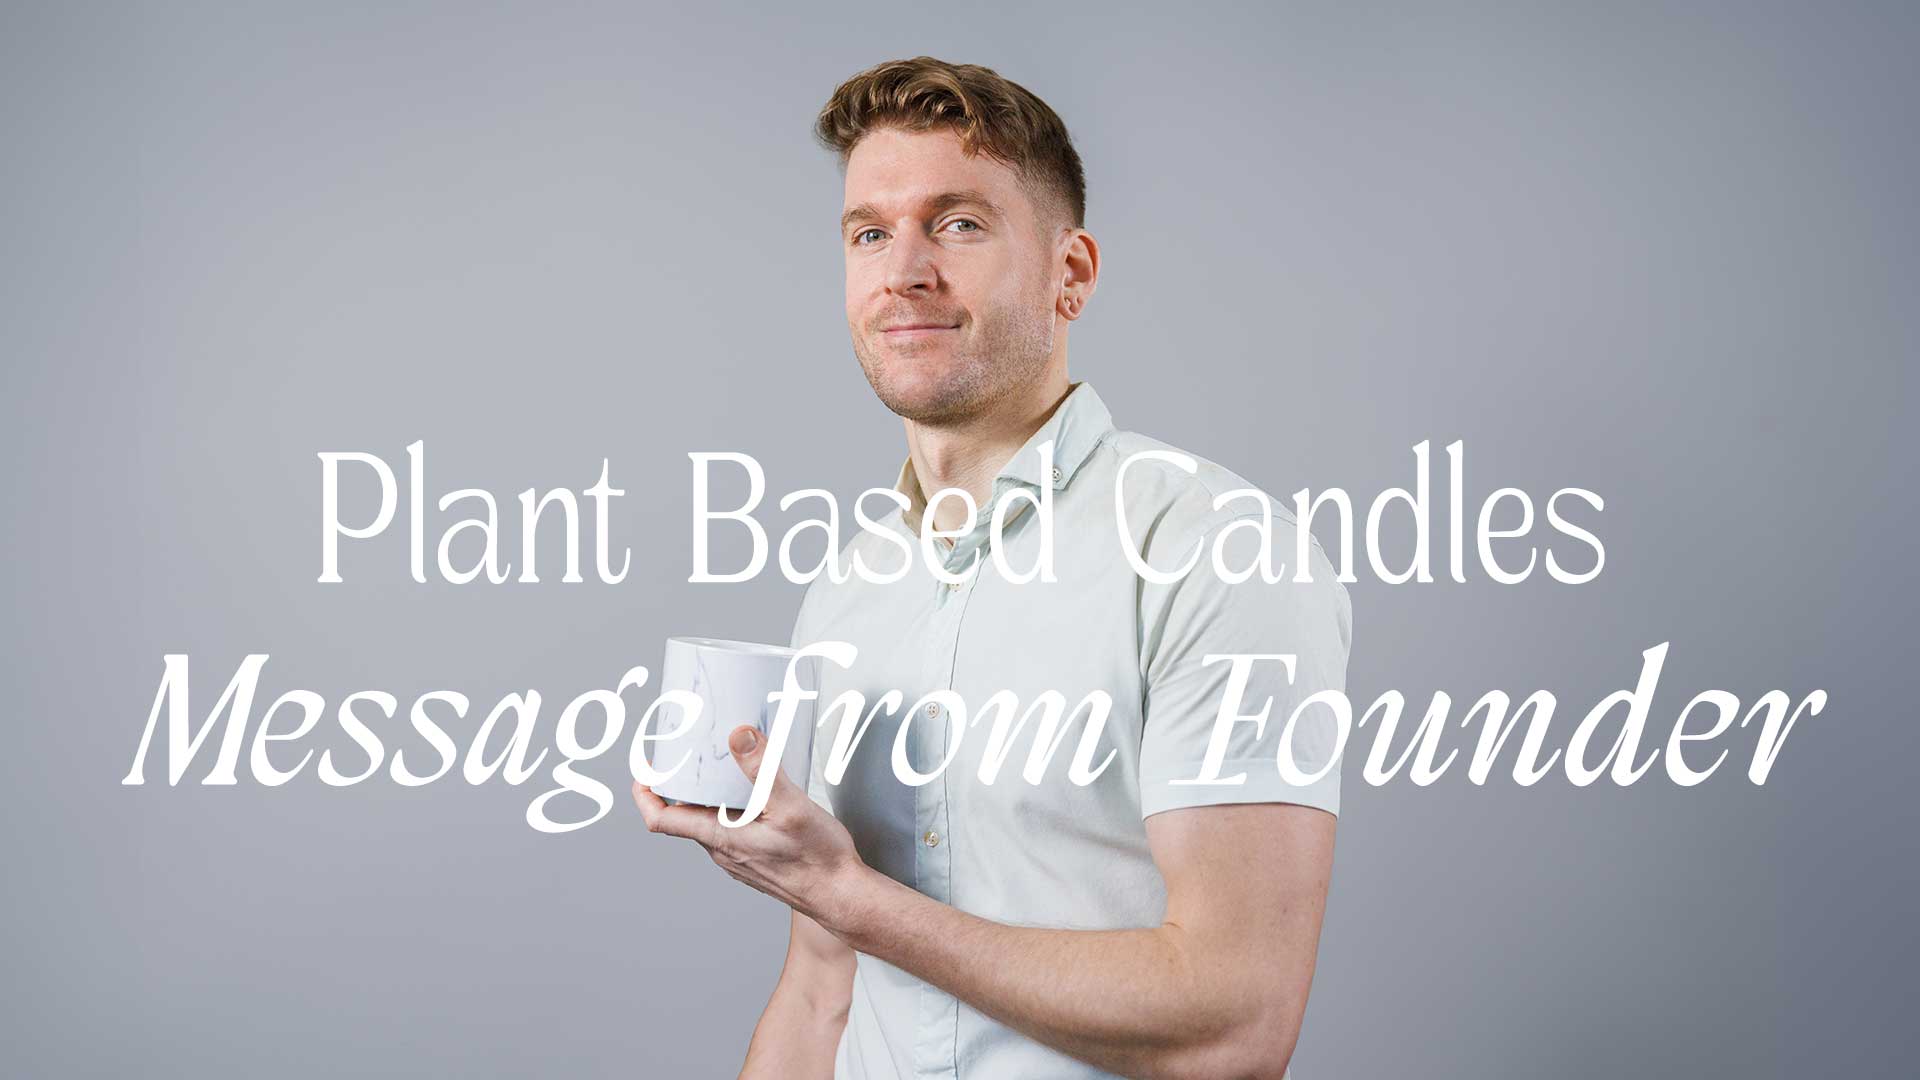 Load video: Plant Based Candles Founder Story